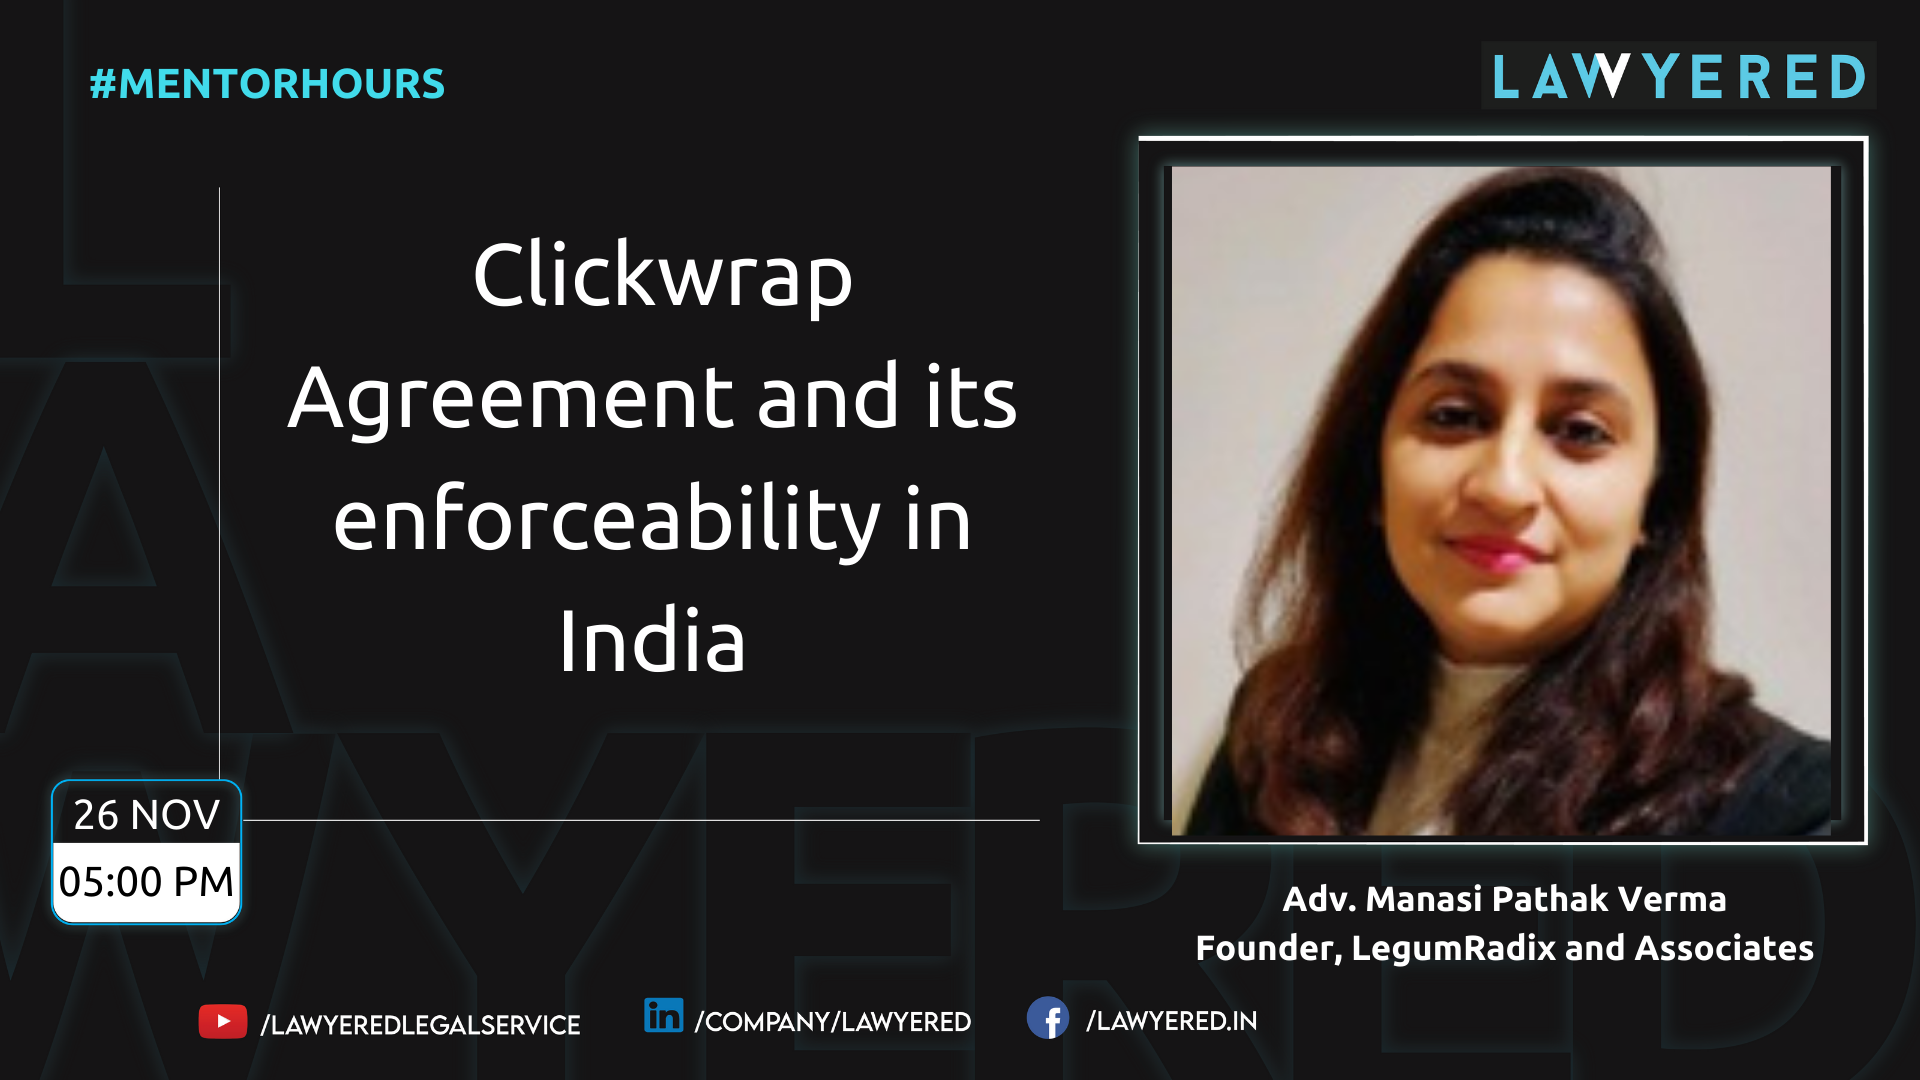 #MentorHour on Clickwrap Agreement and its enforceability in India with Adv. Manasi Pathak Verma Bhide